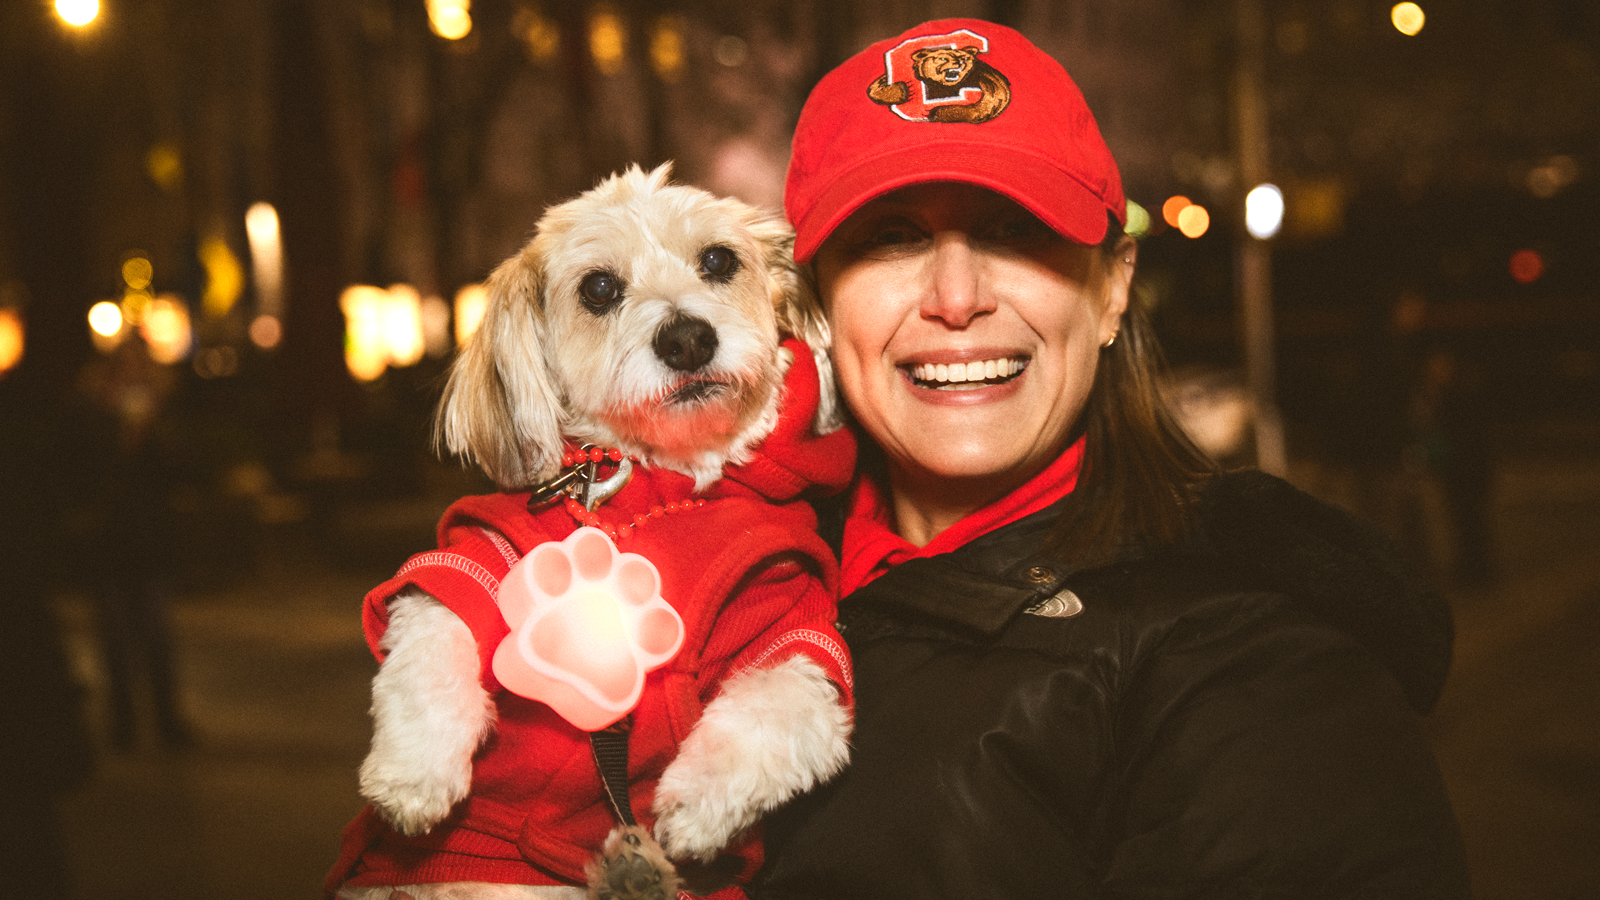 A woman with a red hat holding a small dog wearing a red sweater during the Sy Katz Parade in New York City